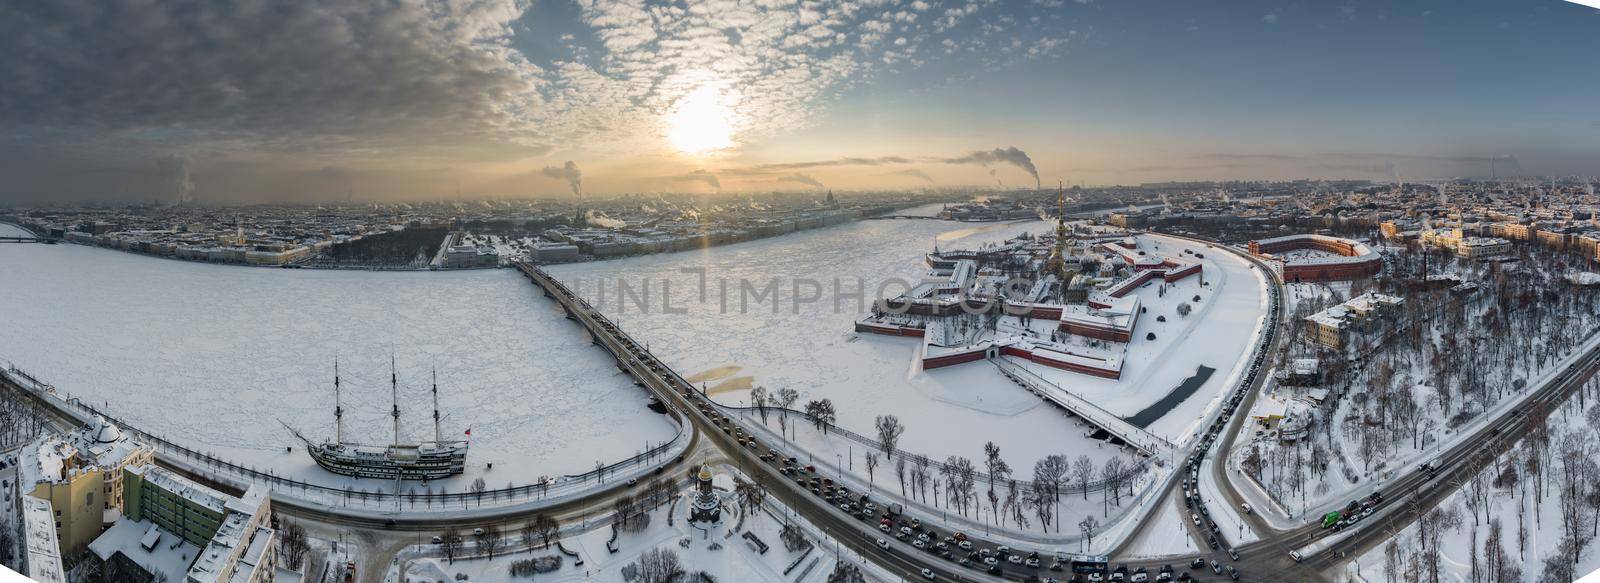 Drone point of view of winter St. Petersburg at sunset, frozen Neva river, steam over city, Peter and Paul fortress, car traffic on Trinity bridge, rostral columns, Palace drawbridge, panoramic view by vladimirdrozdin